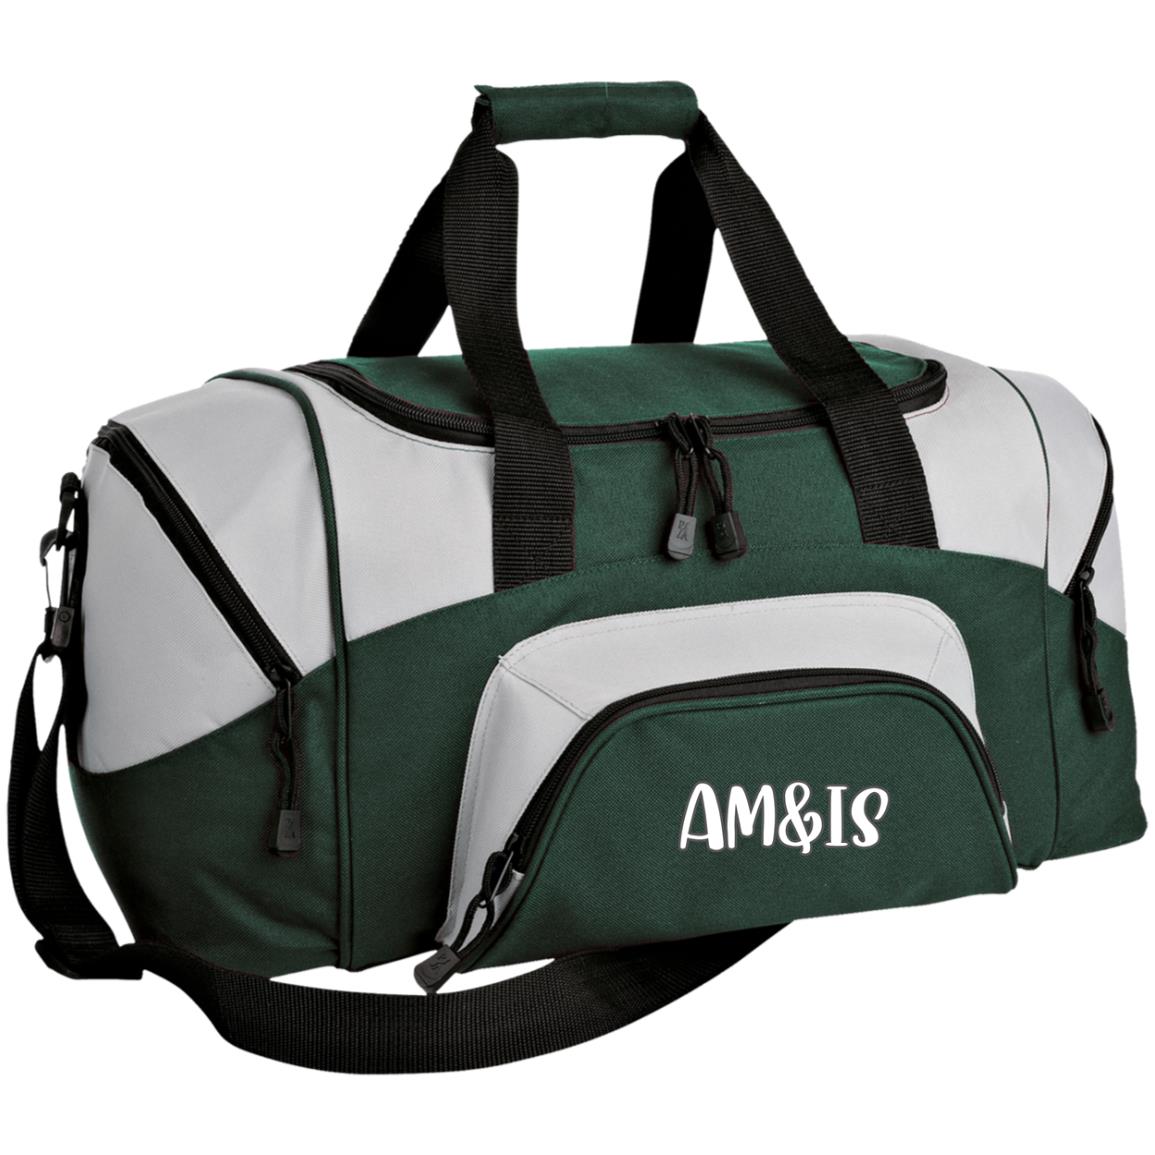 HUNTER GREEN/GRAY ONE SIZE - AM&IS Activewear Small Colorblock Sport Duffel Bag - duffel bag at TFC&H Co.